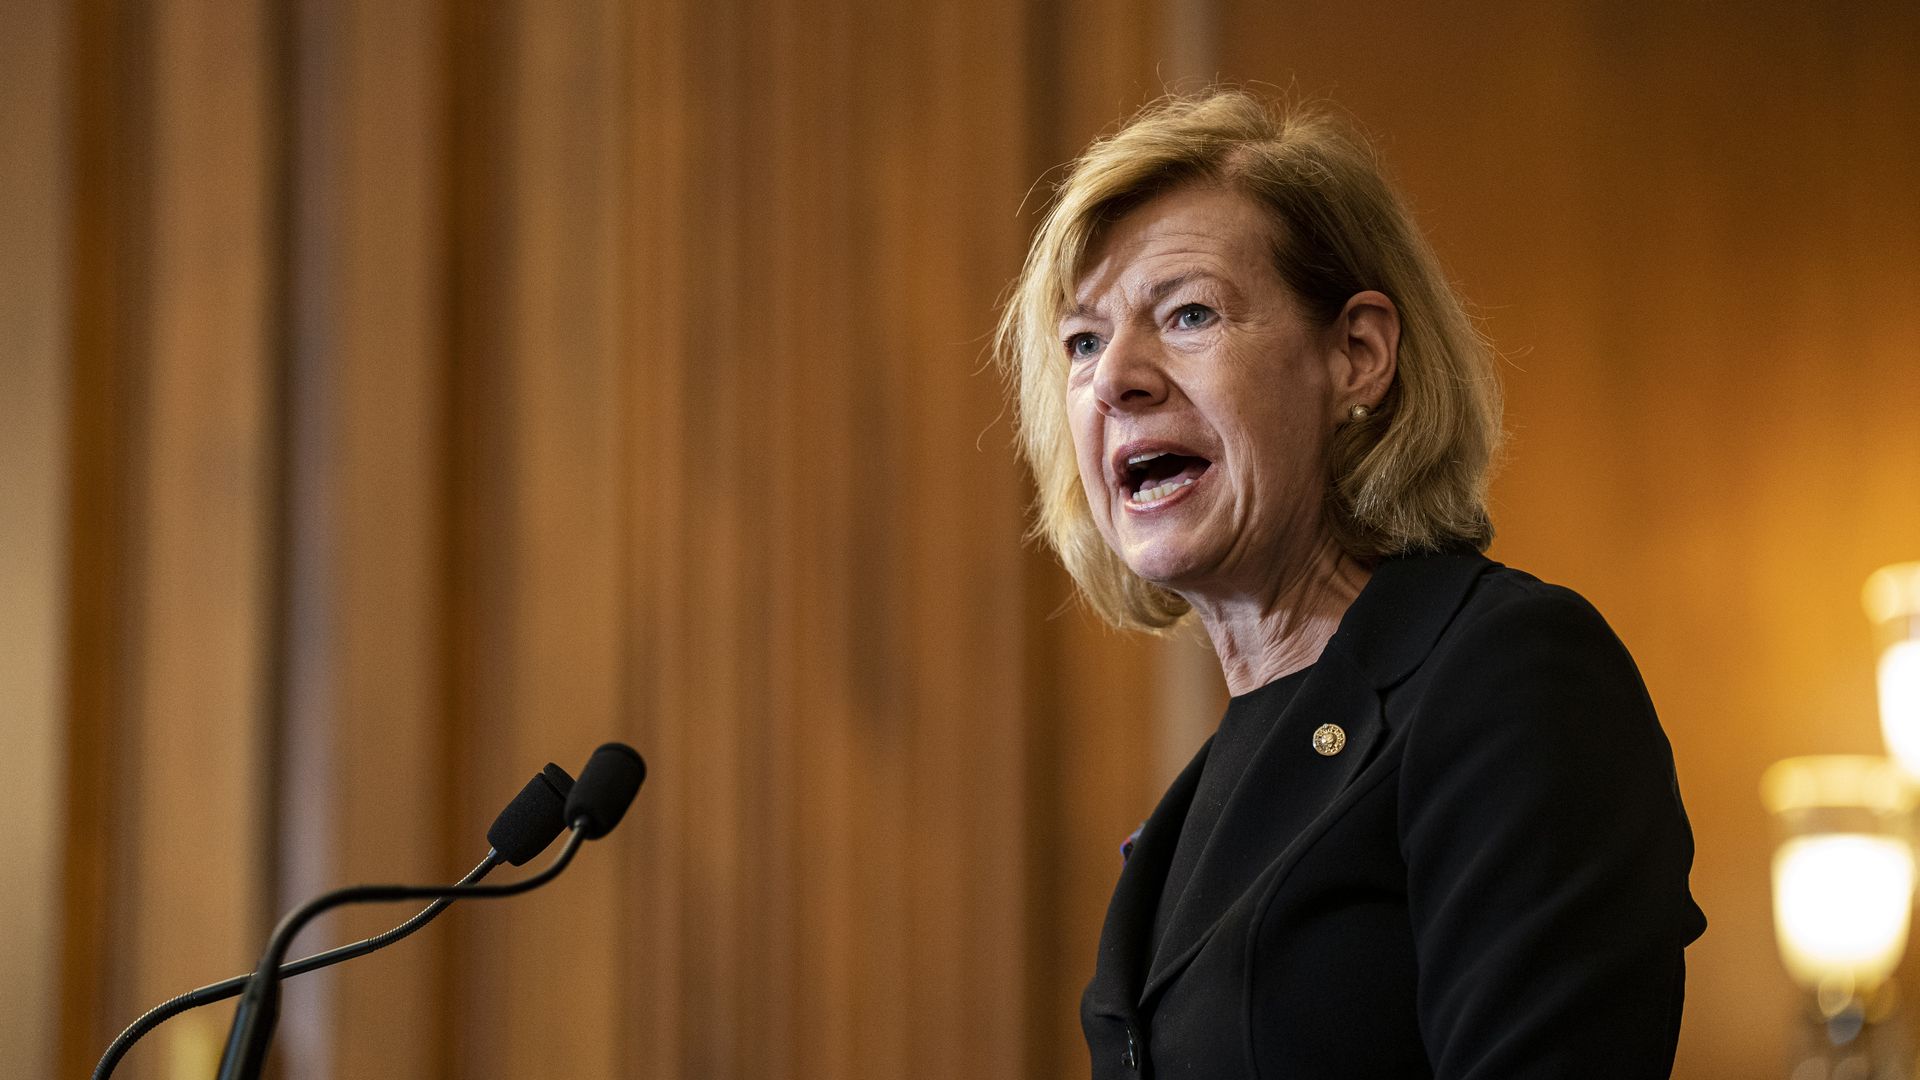 Sen. Tammy Baldwin, wearing a black suit over a black shirt, speaks at a microphone in the Rayburn Room of the Capitol.